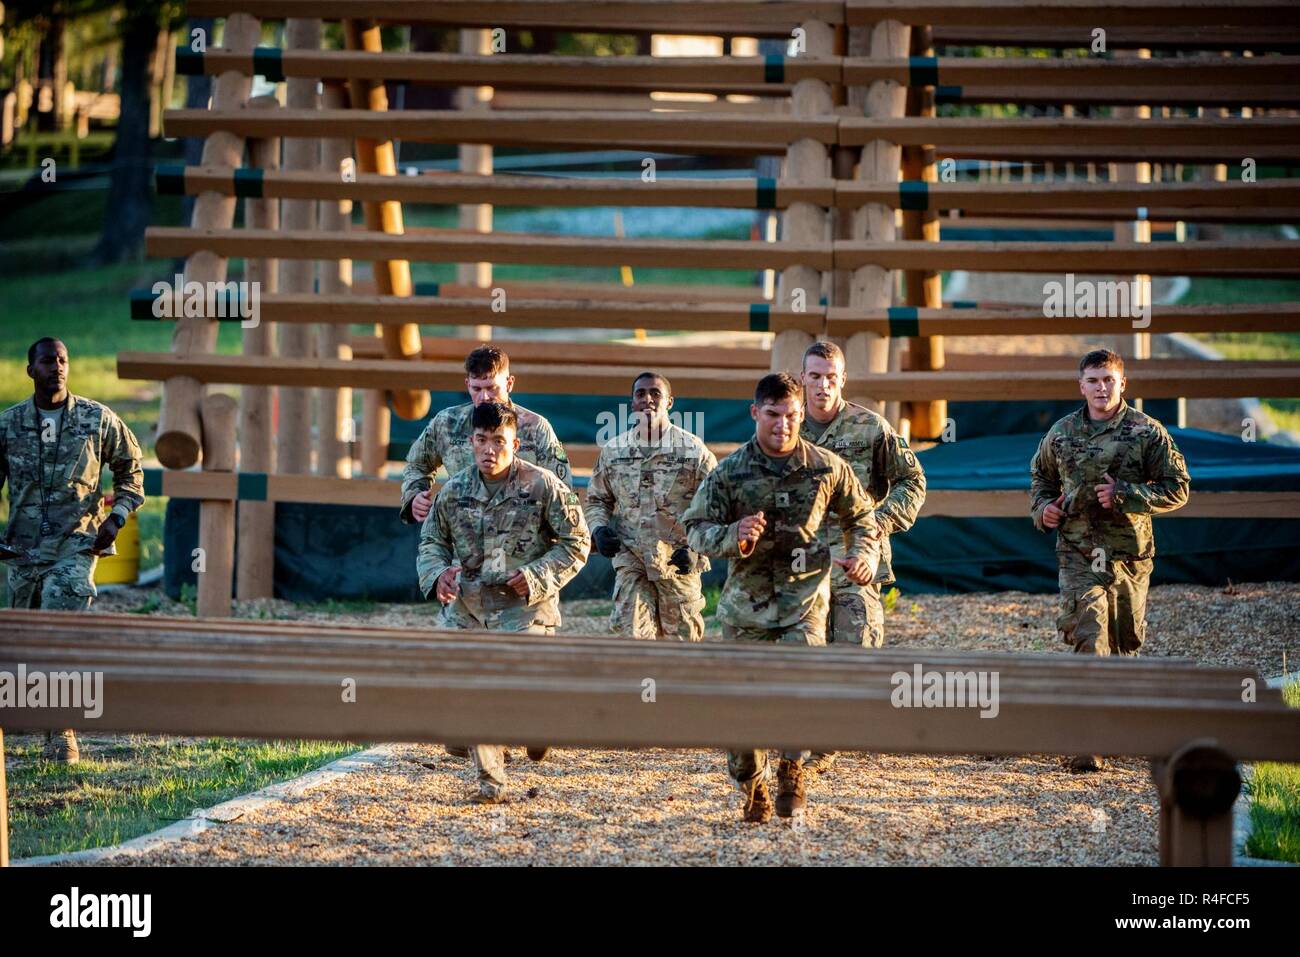 (FORT BENNING, Ga) – The Scout Squad representing 2-14 Cav, 25th Infantry Division approach an obstacle during the 2017 Gainey Cup Best Scout Squad Competition prior to conducting the Squad Stress Shoot on May 2, 2017, at Simpson Range on Main Post. The biennial Gainey Cup Competition is designed to identify the most competent and versatile Scout Squad in the US Armed Forces and partnering Allies through an extremely challenging contest centered on essential reconnaissance and security tasks and skills. Stock Photo